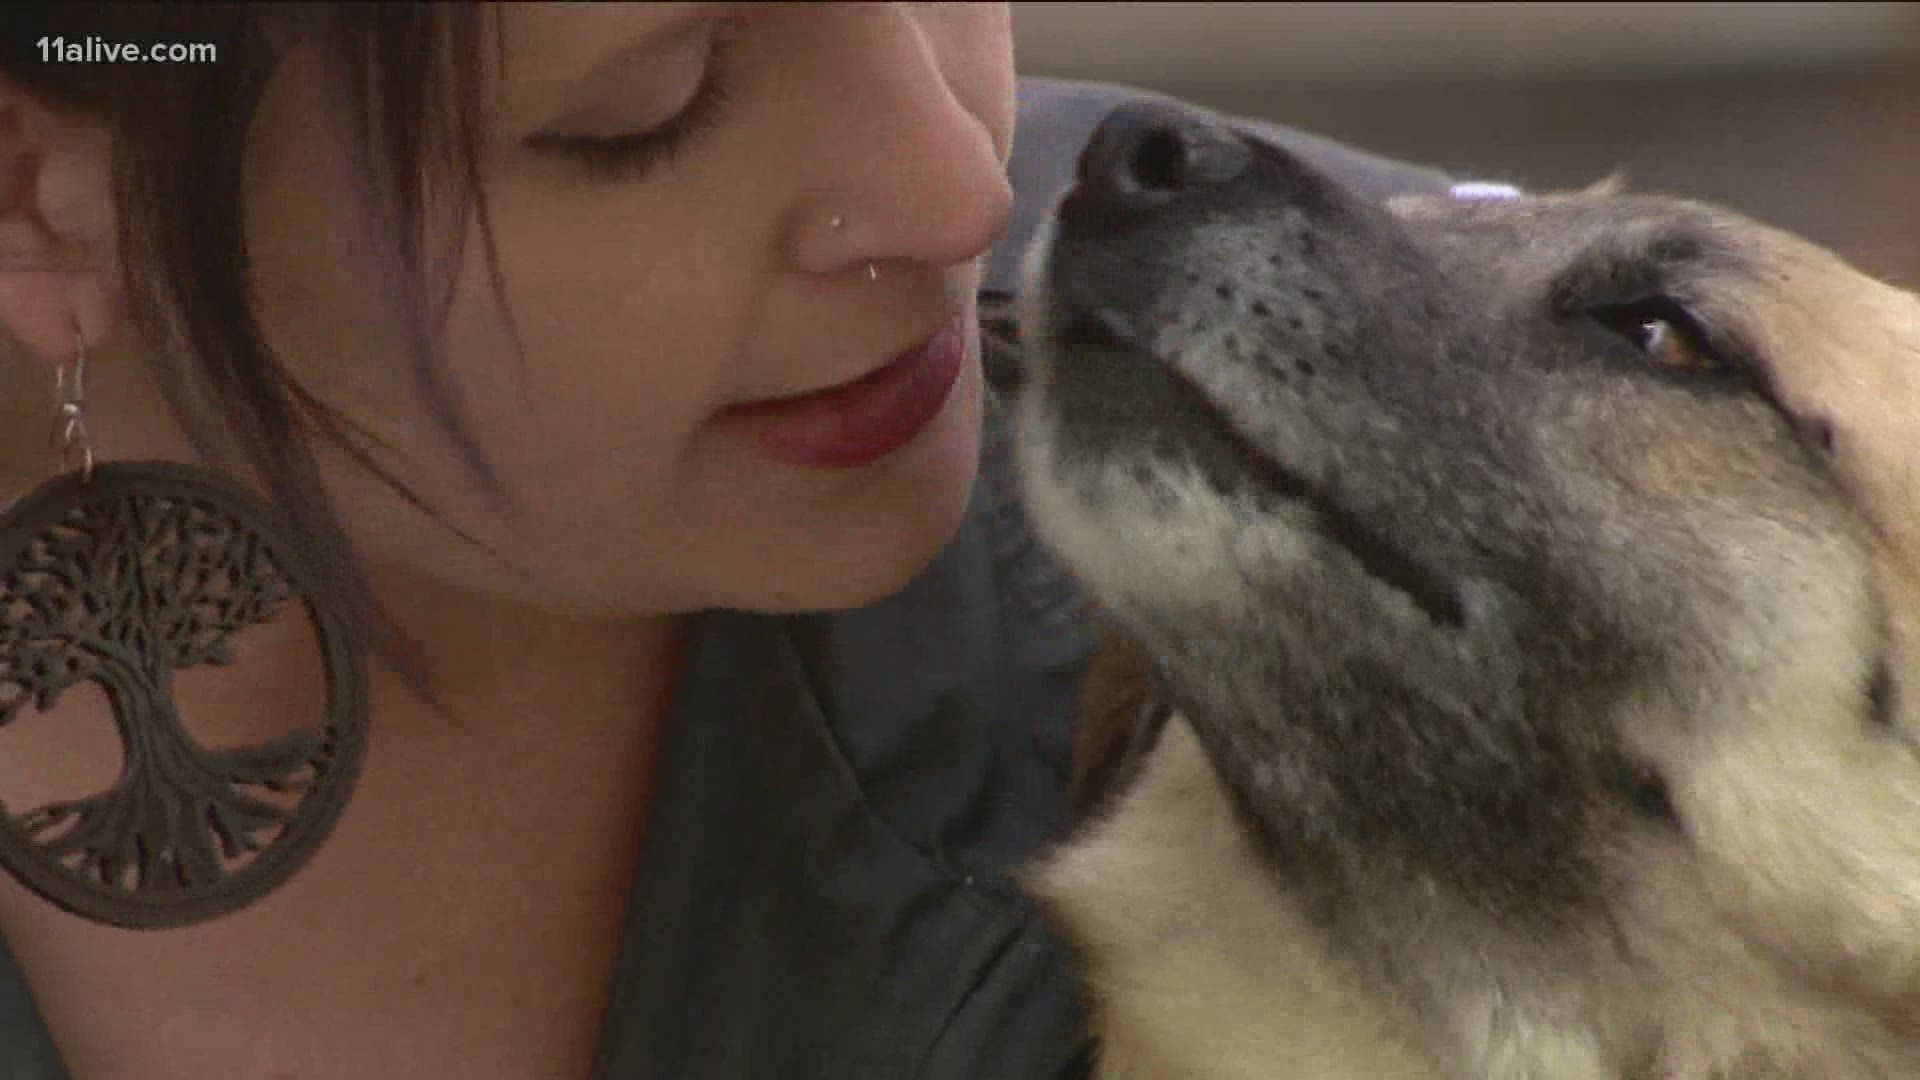 This is the incredible "real Homeward Bound" story of Zelda's journey home in Minnesota.